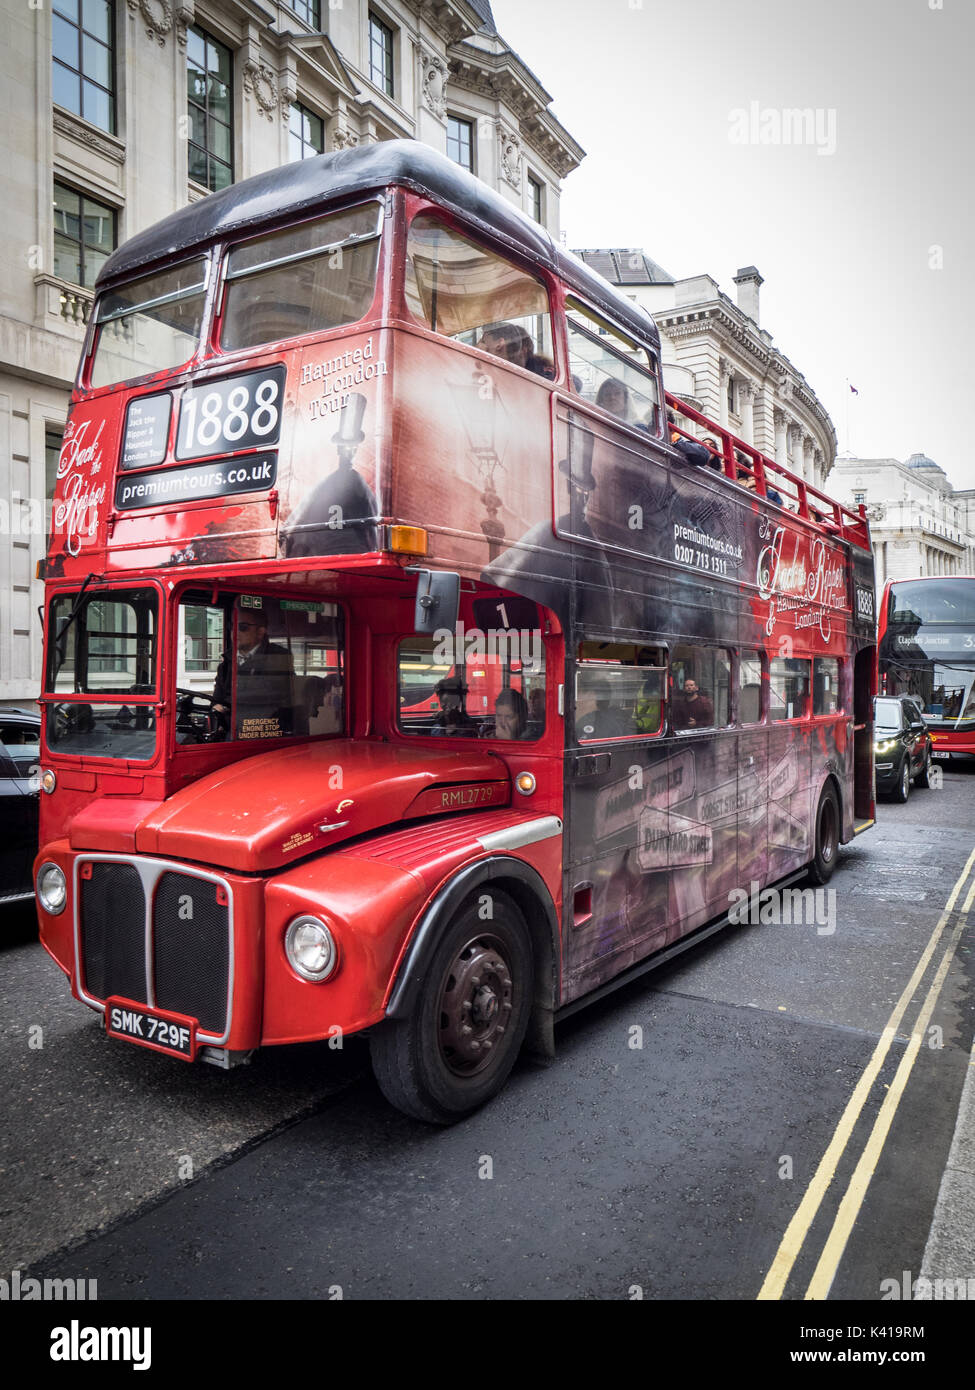 London Tourism - Jack the Ripper open topped tour bus in the City of London financial district Stock Photo